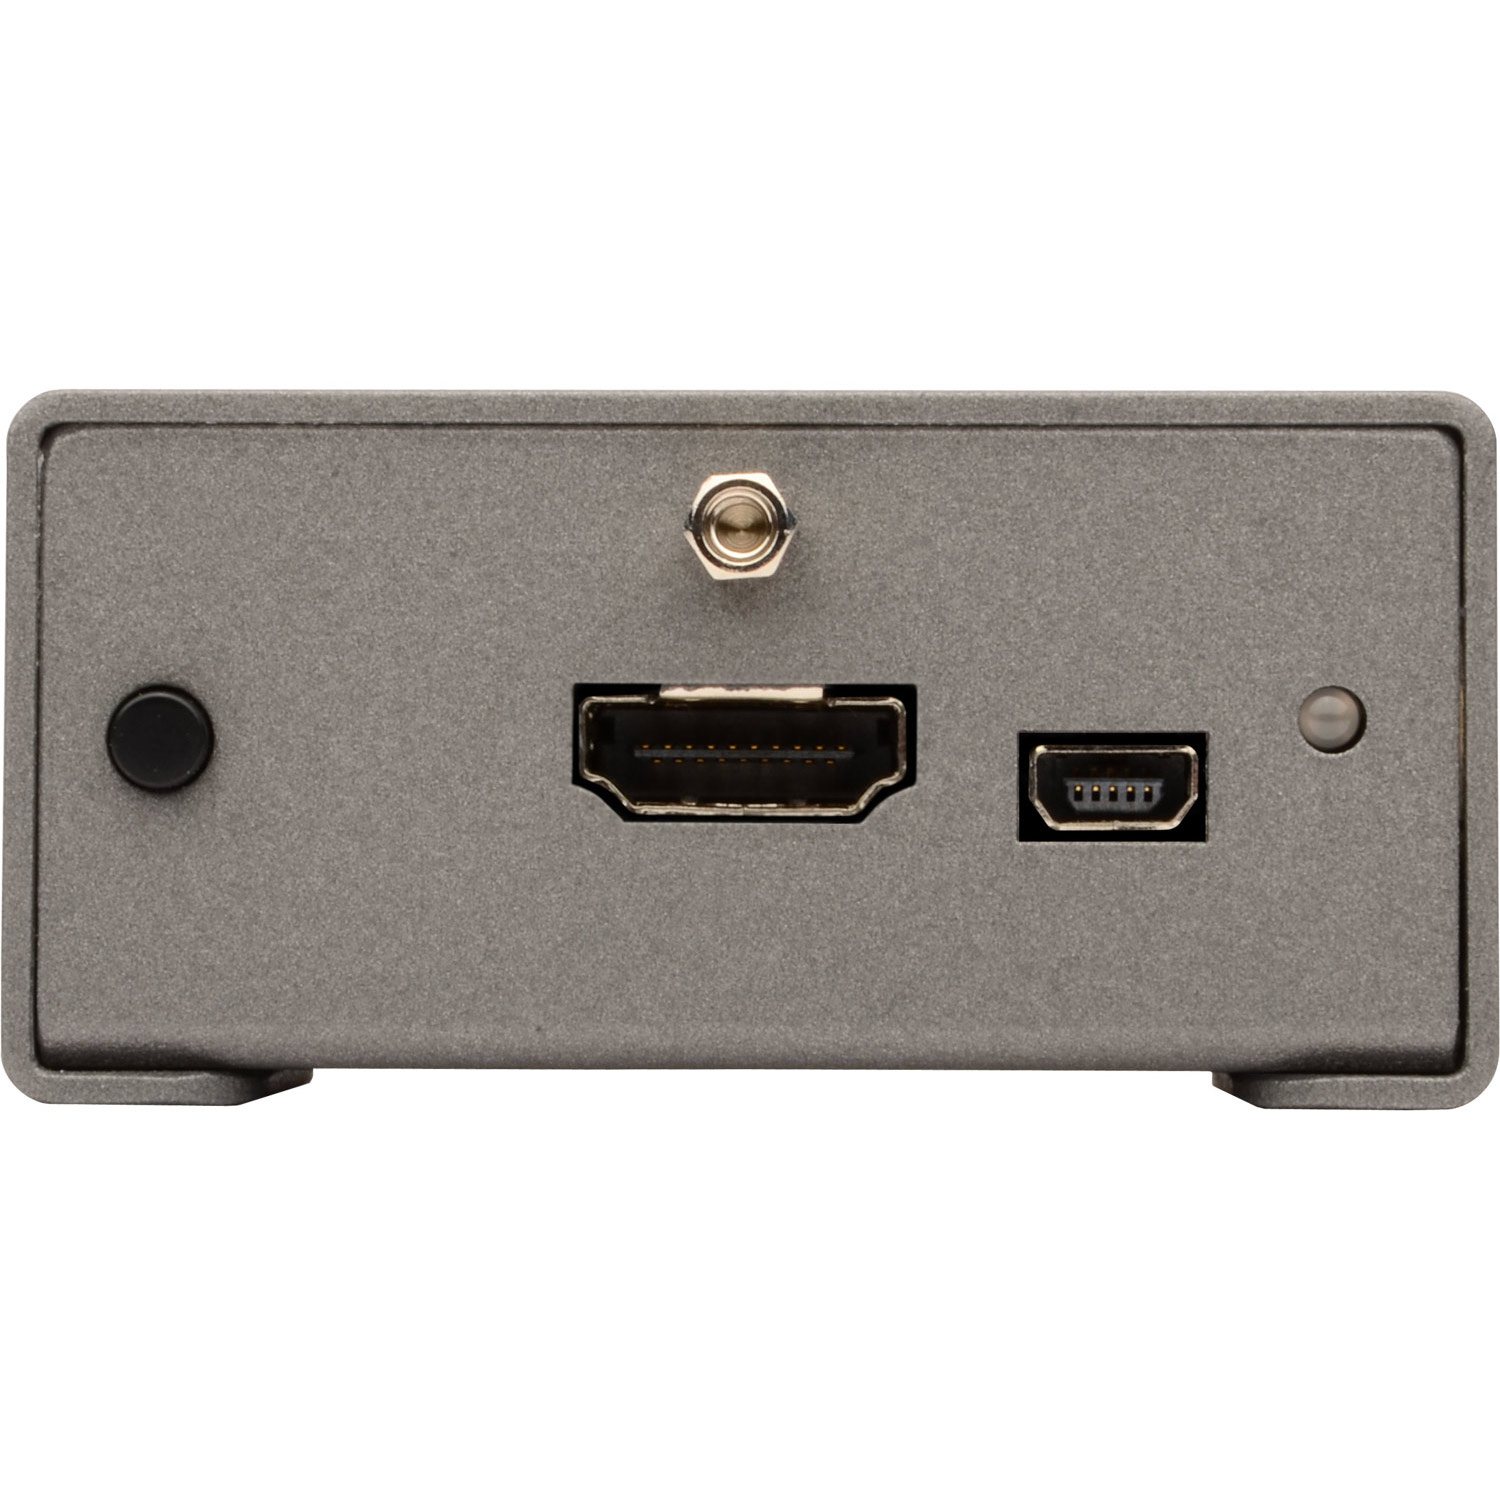 Booster for HDMI with EDID Detective | Gefen